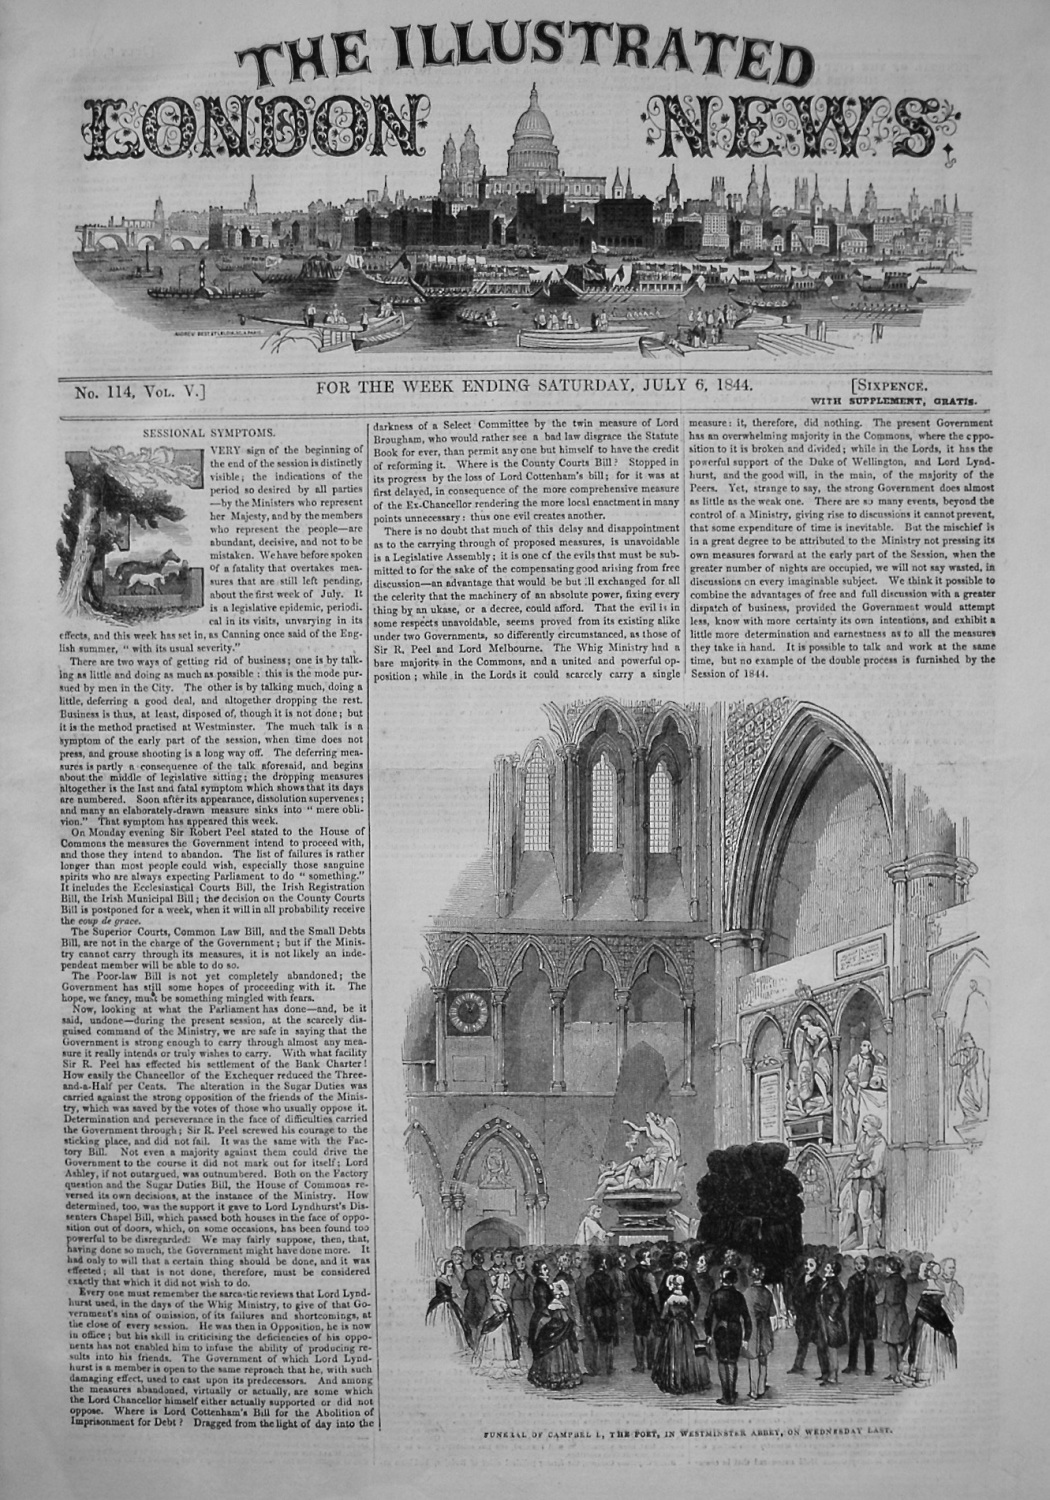 Illustrated London News. July 6th, 1844.